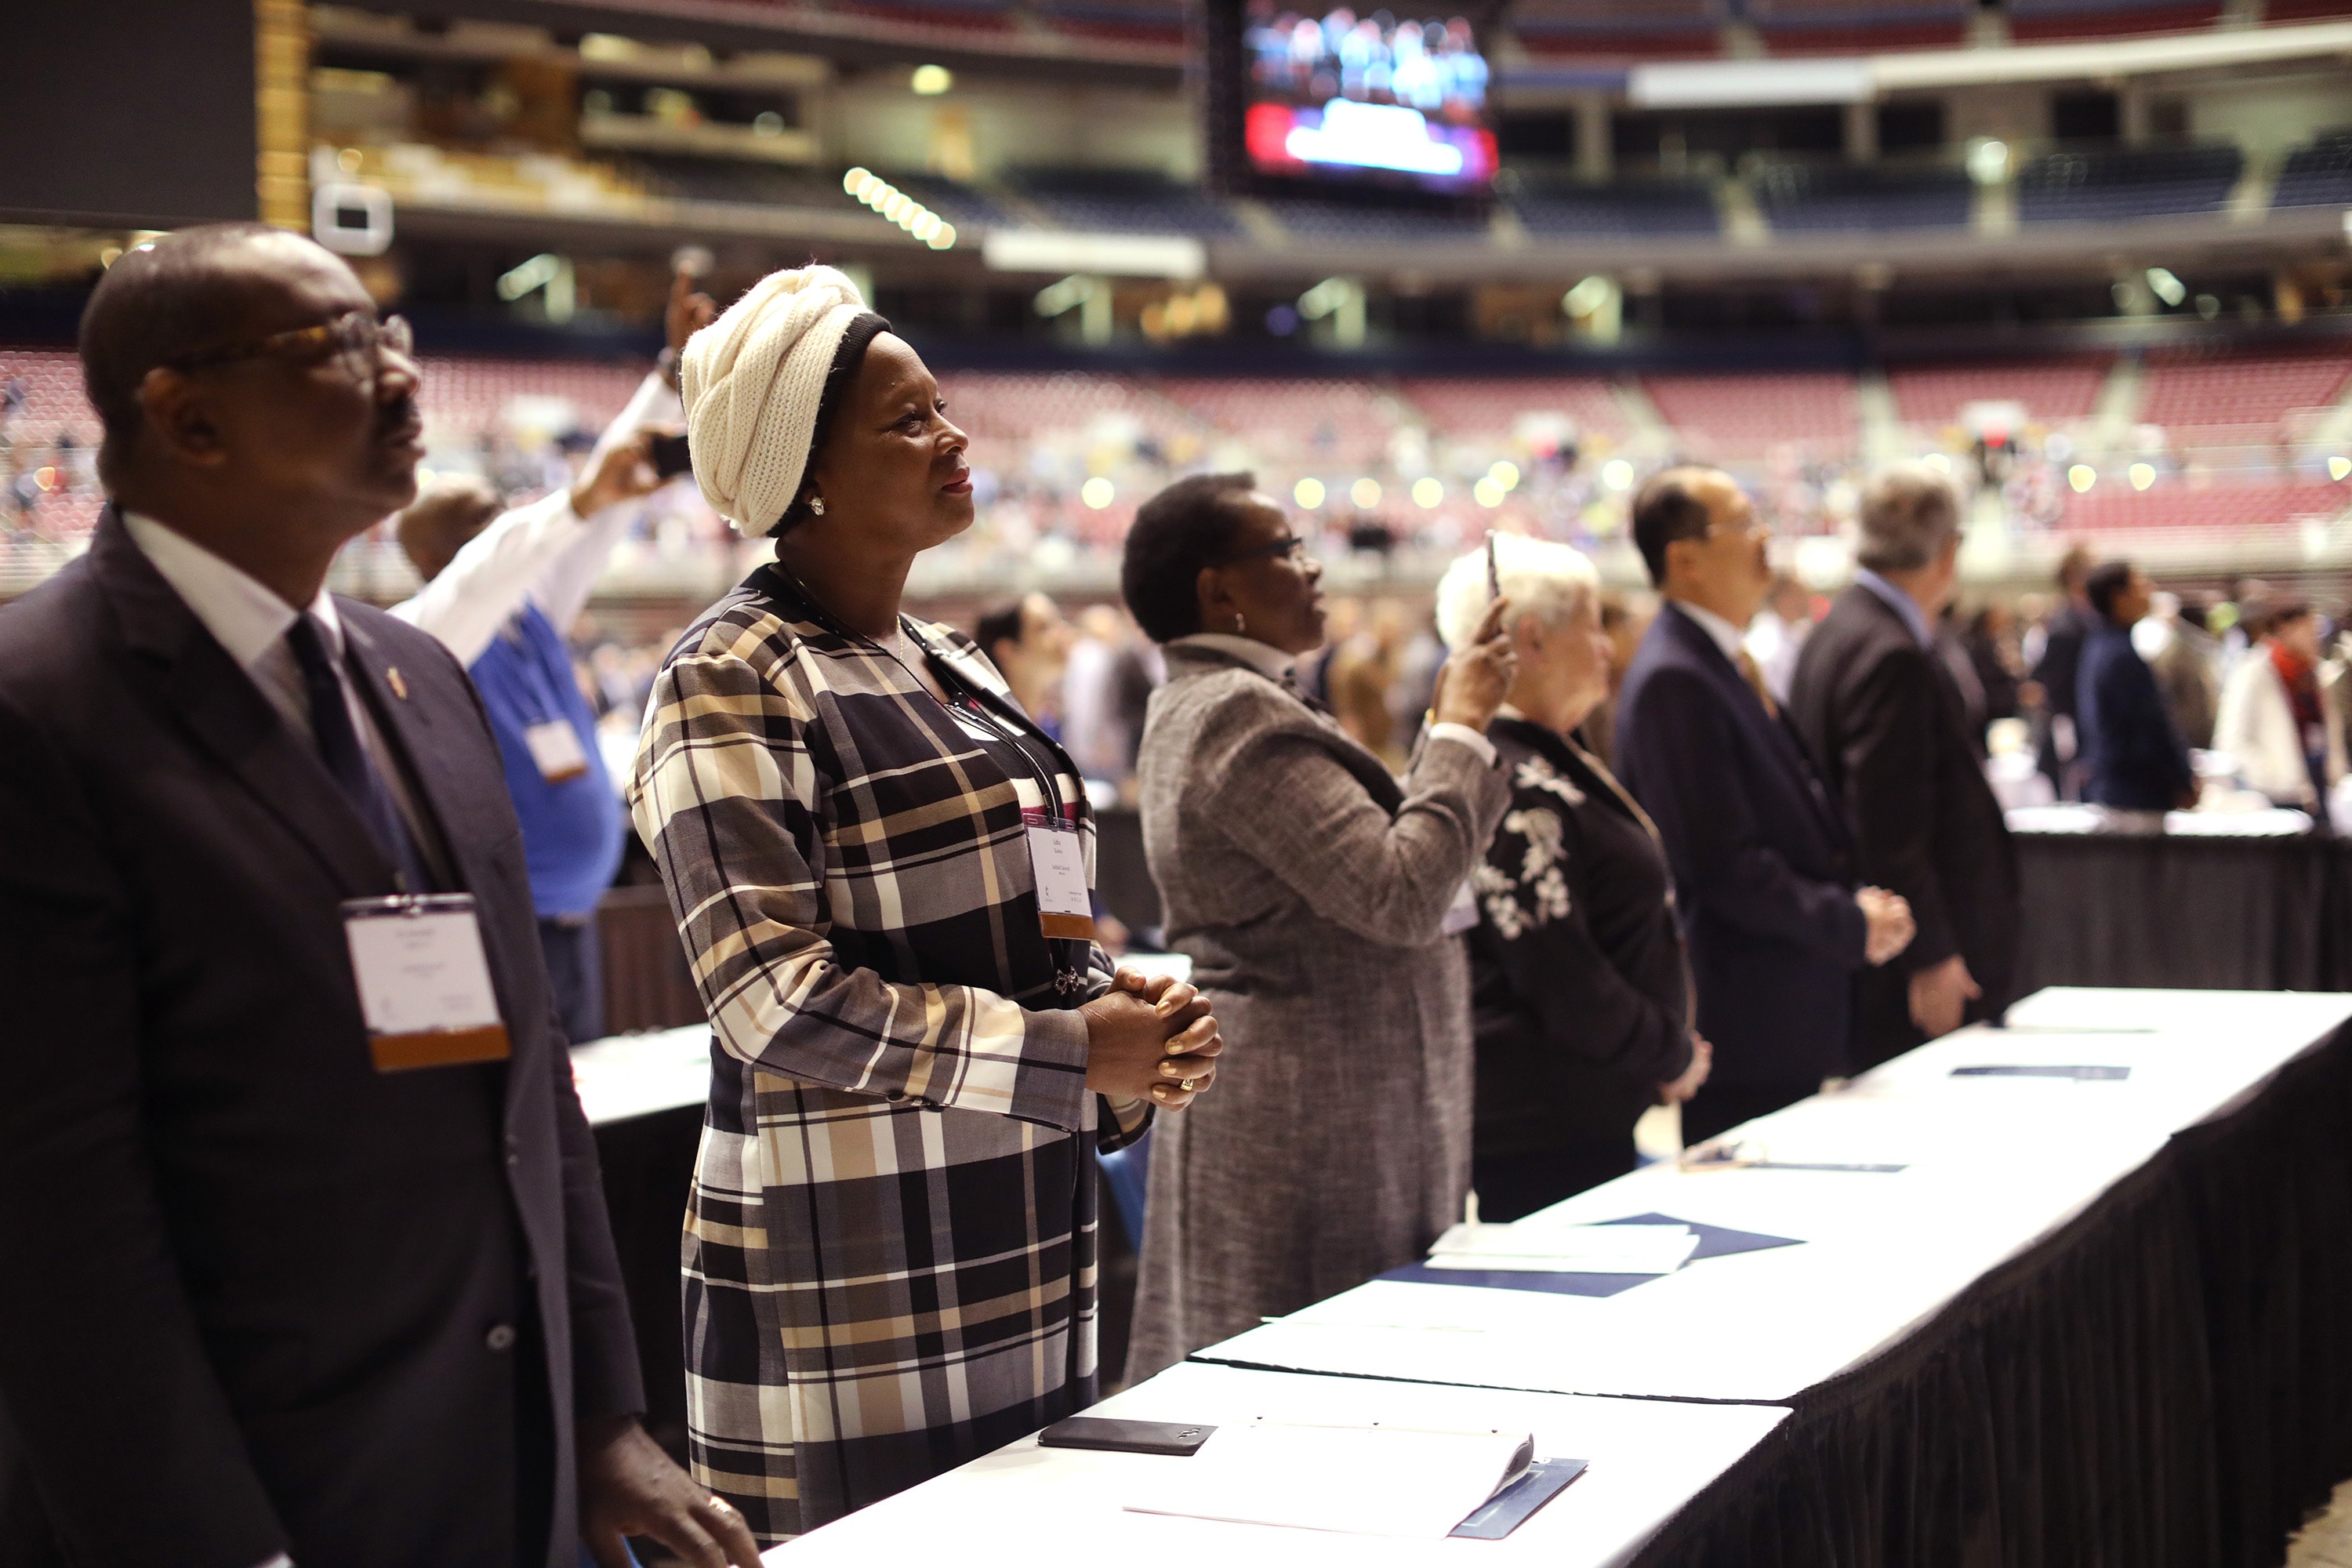 Members of the Judicial Council participate in the Feb. 23 morning of prayer at the 2019 Special Session of the United Methodist General Conference in St. Louis. File photo by Kathleen Barry, UMNS.